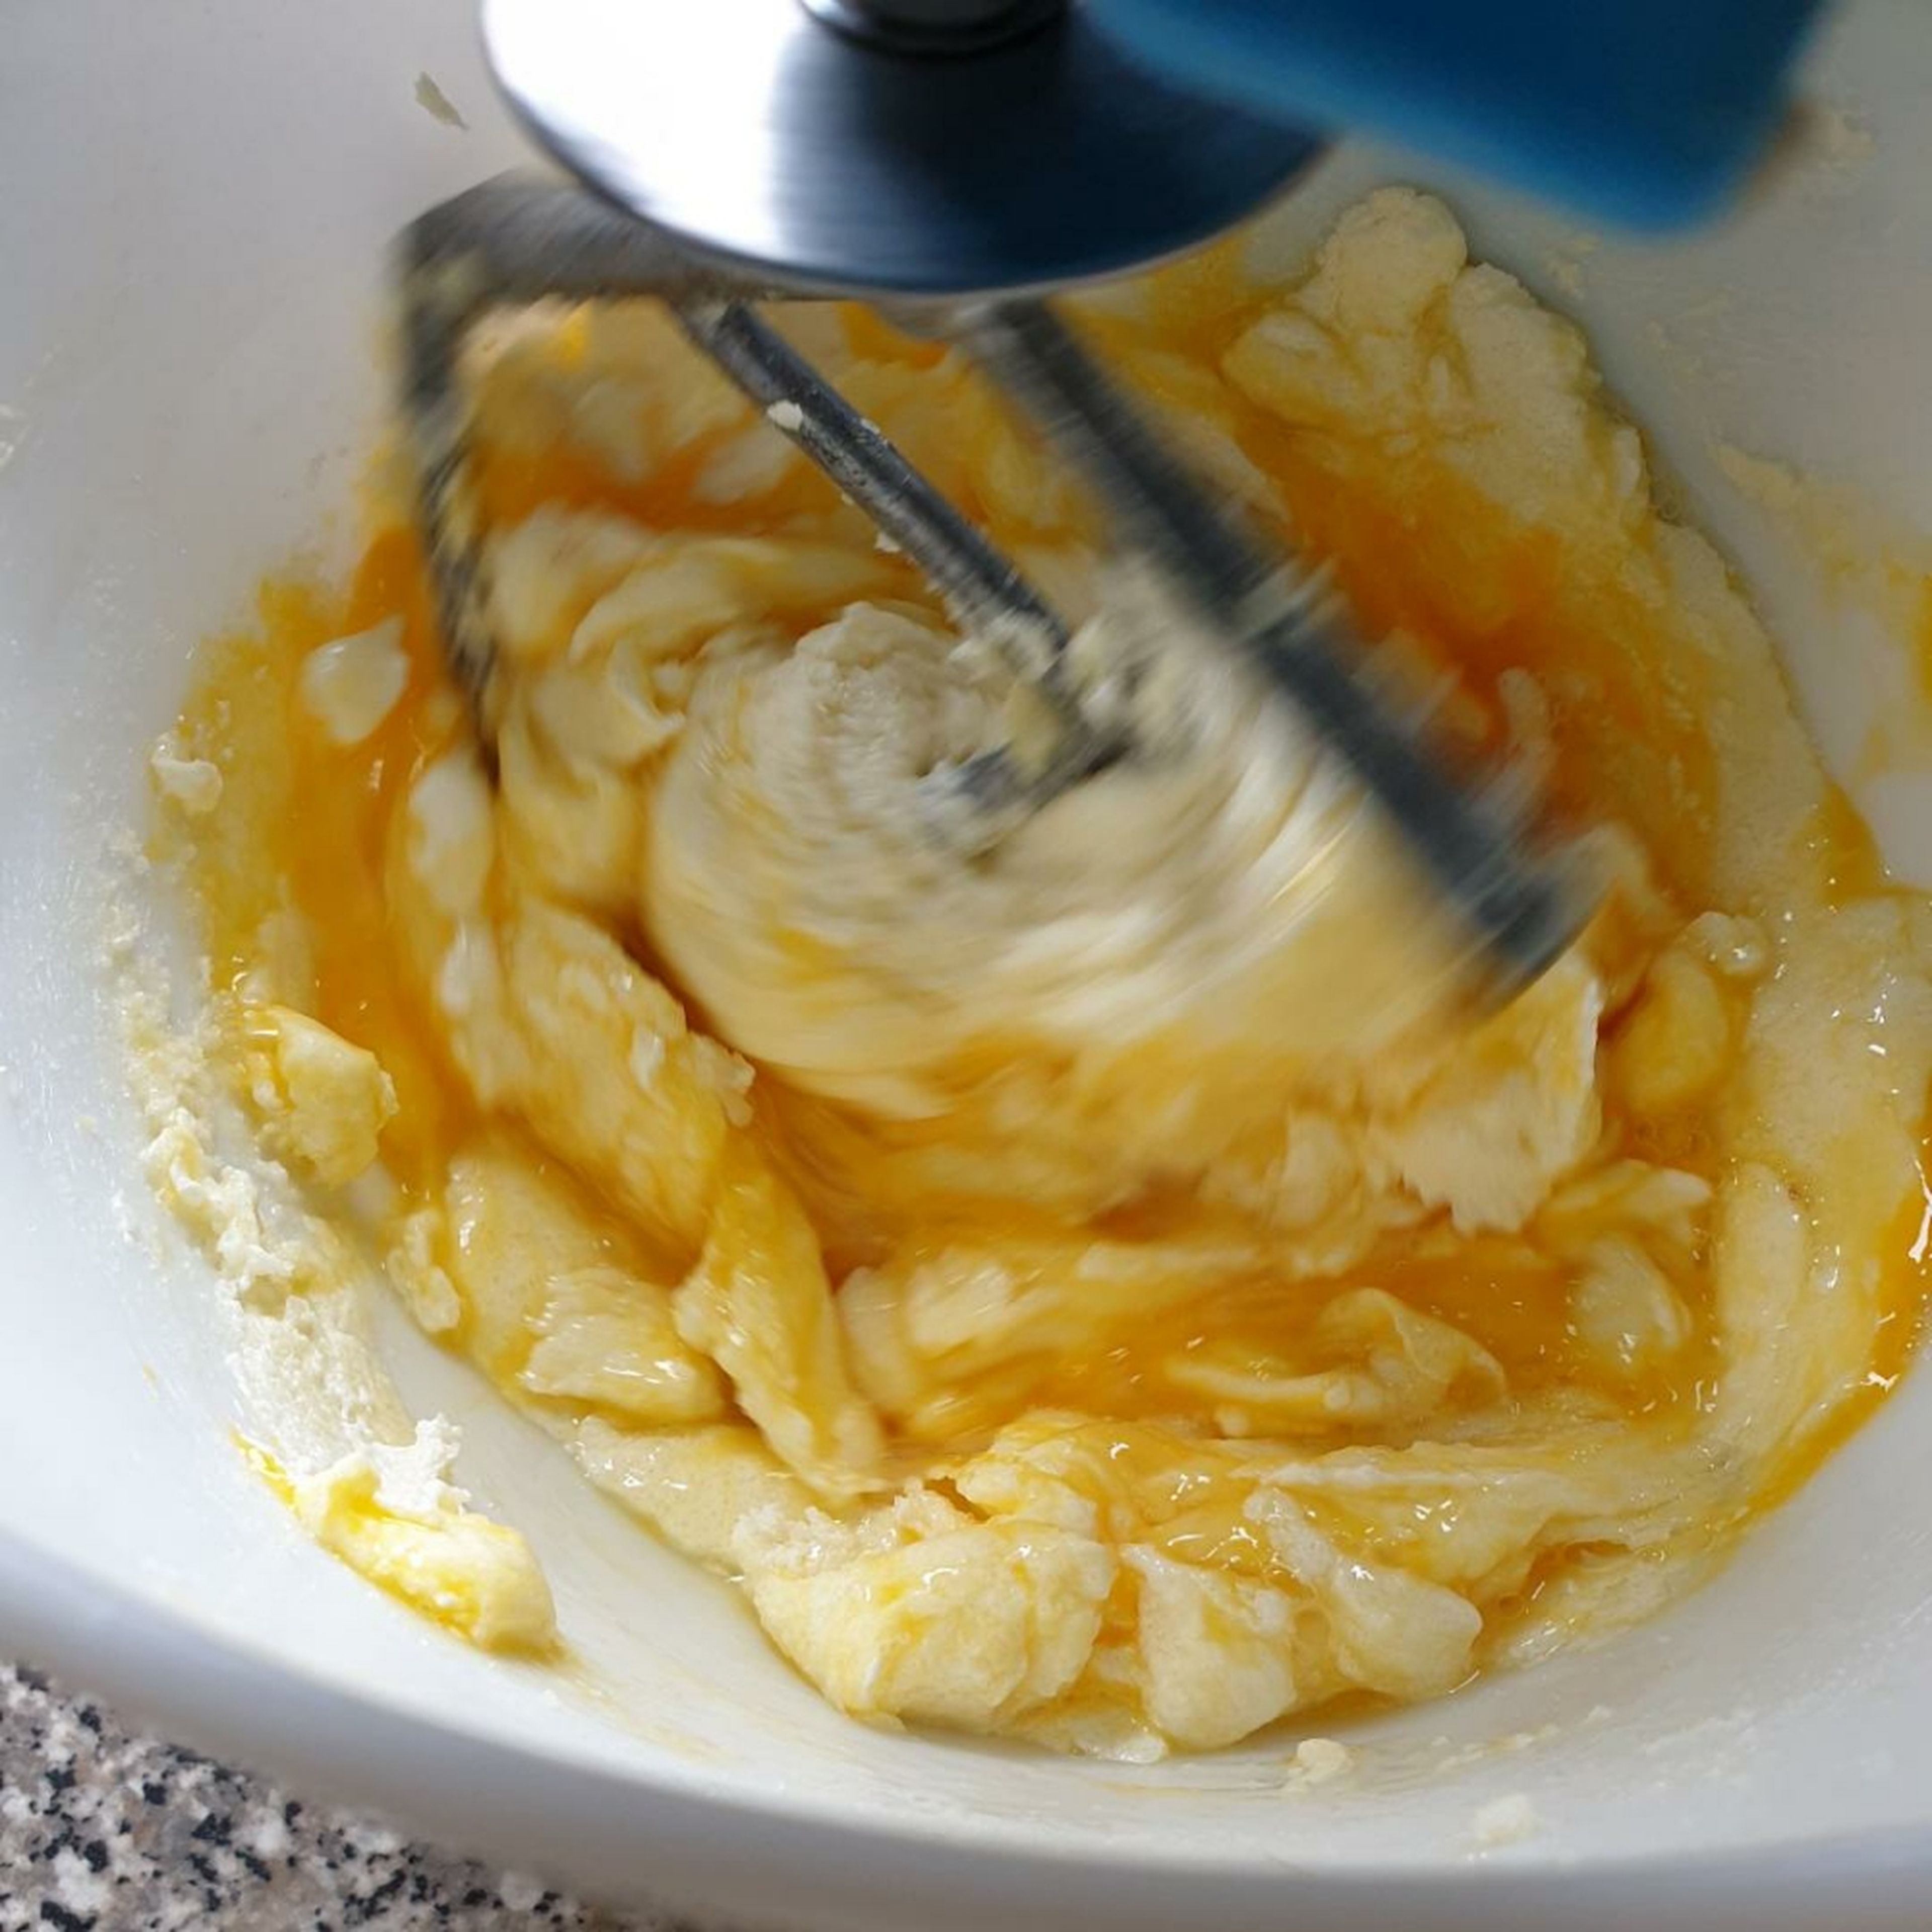 Add the eggs and continue beating the mixture, till combined.